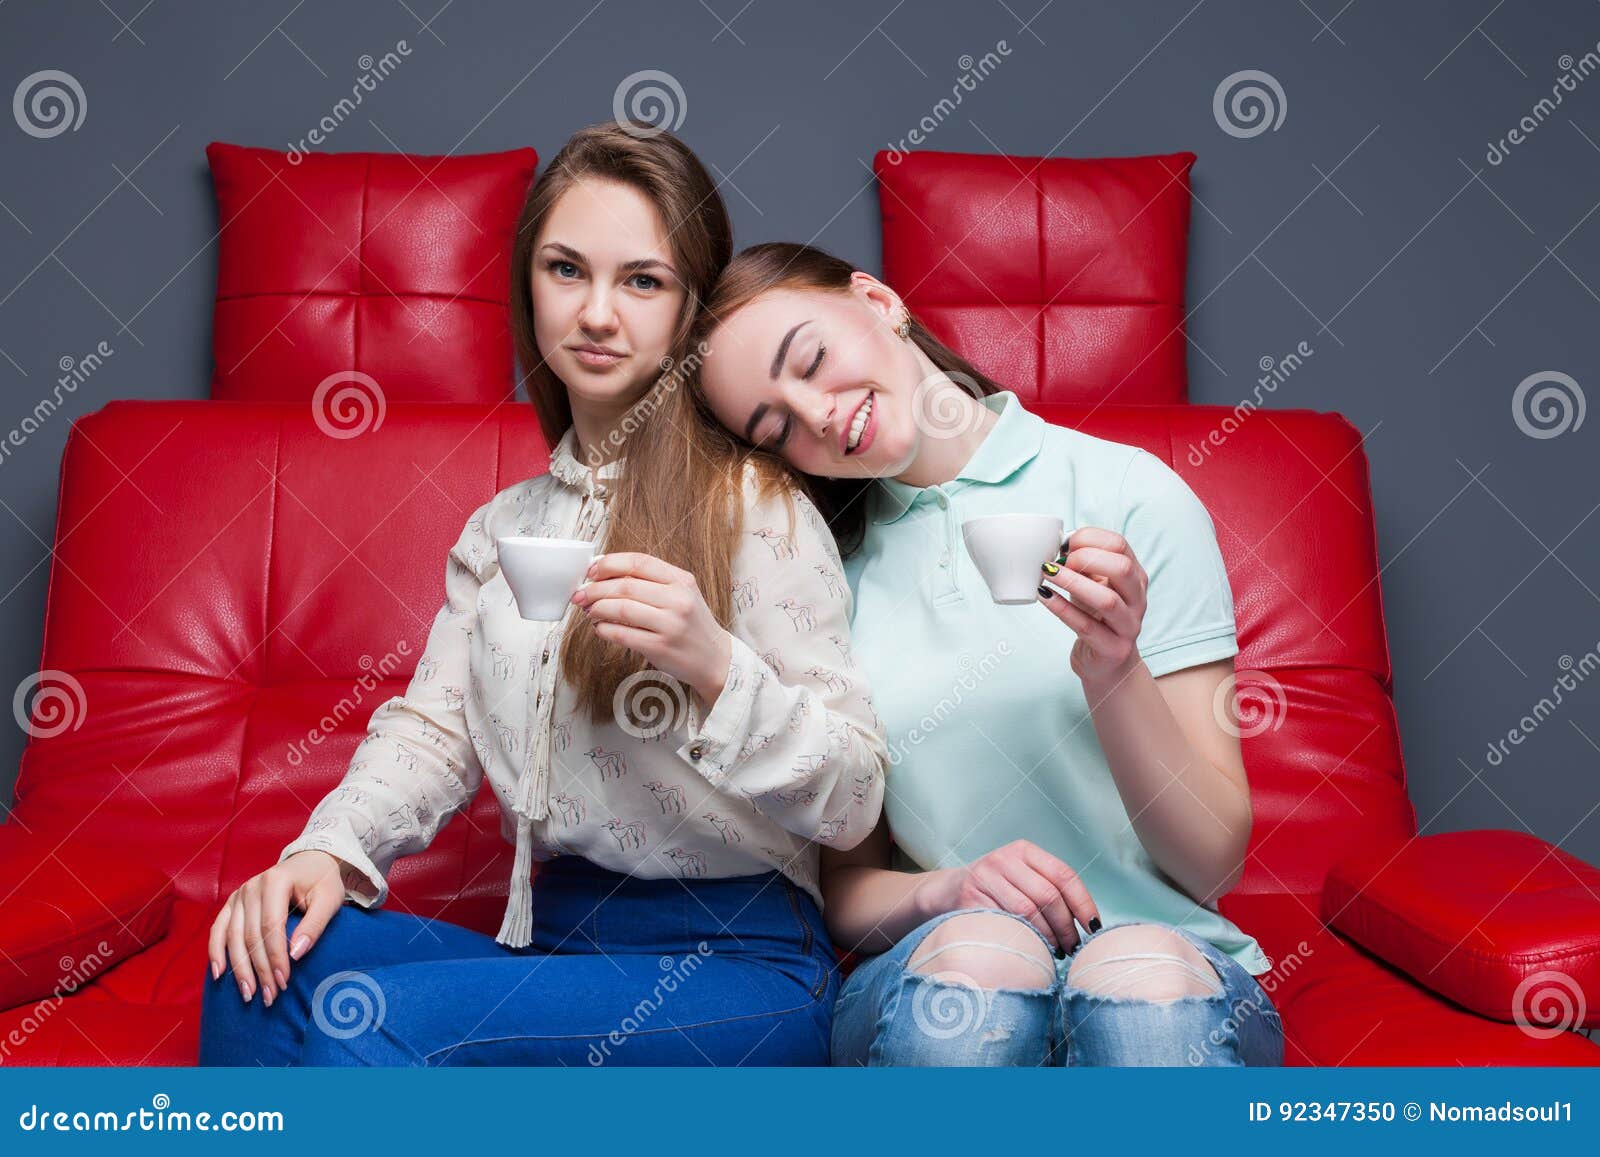 Two girls and a cup